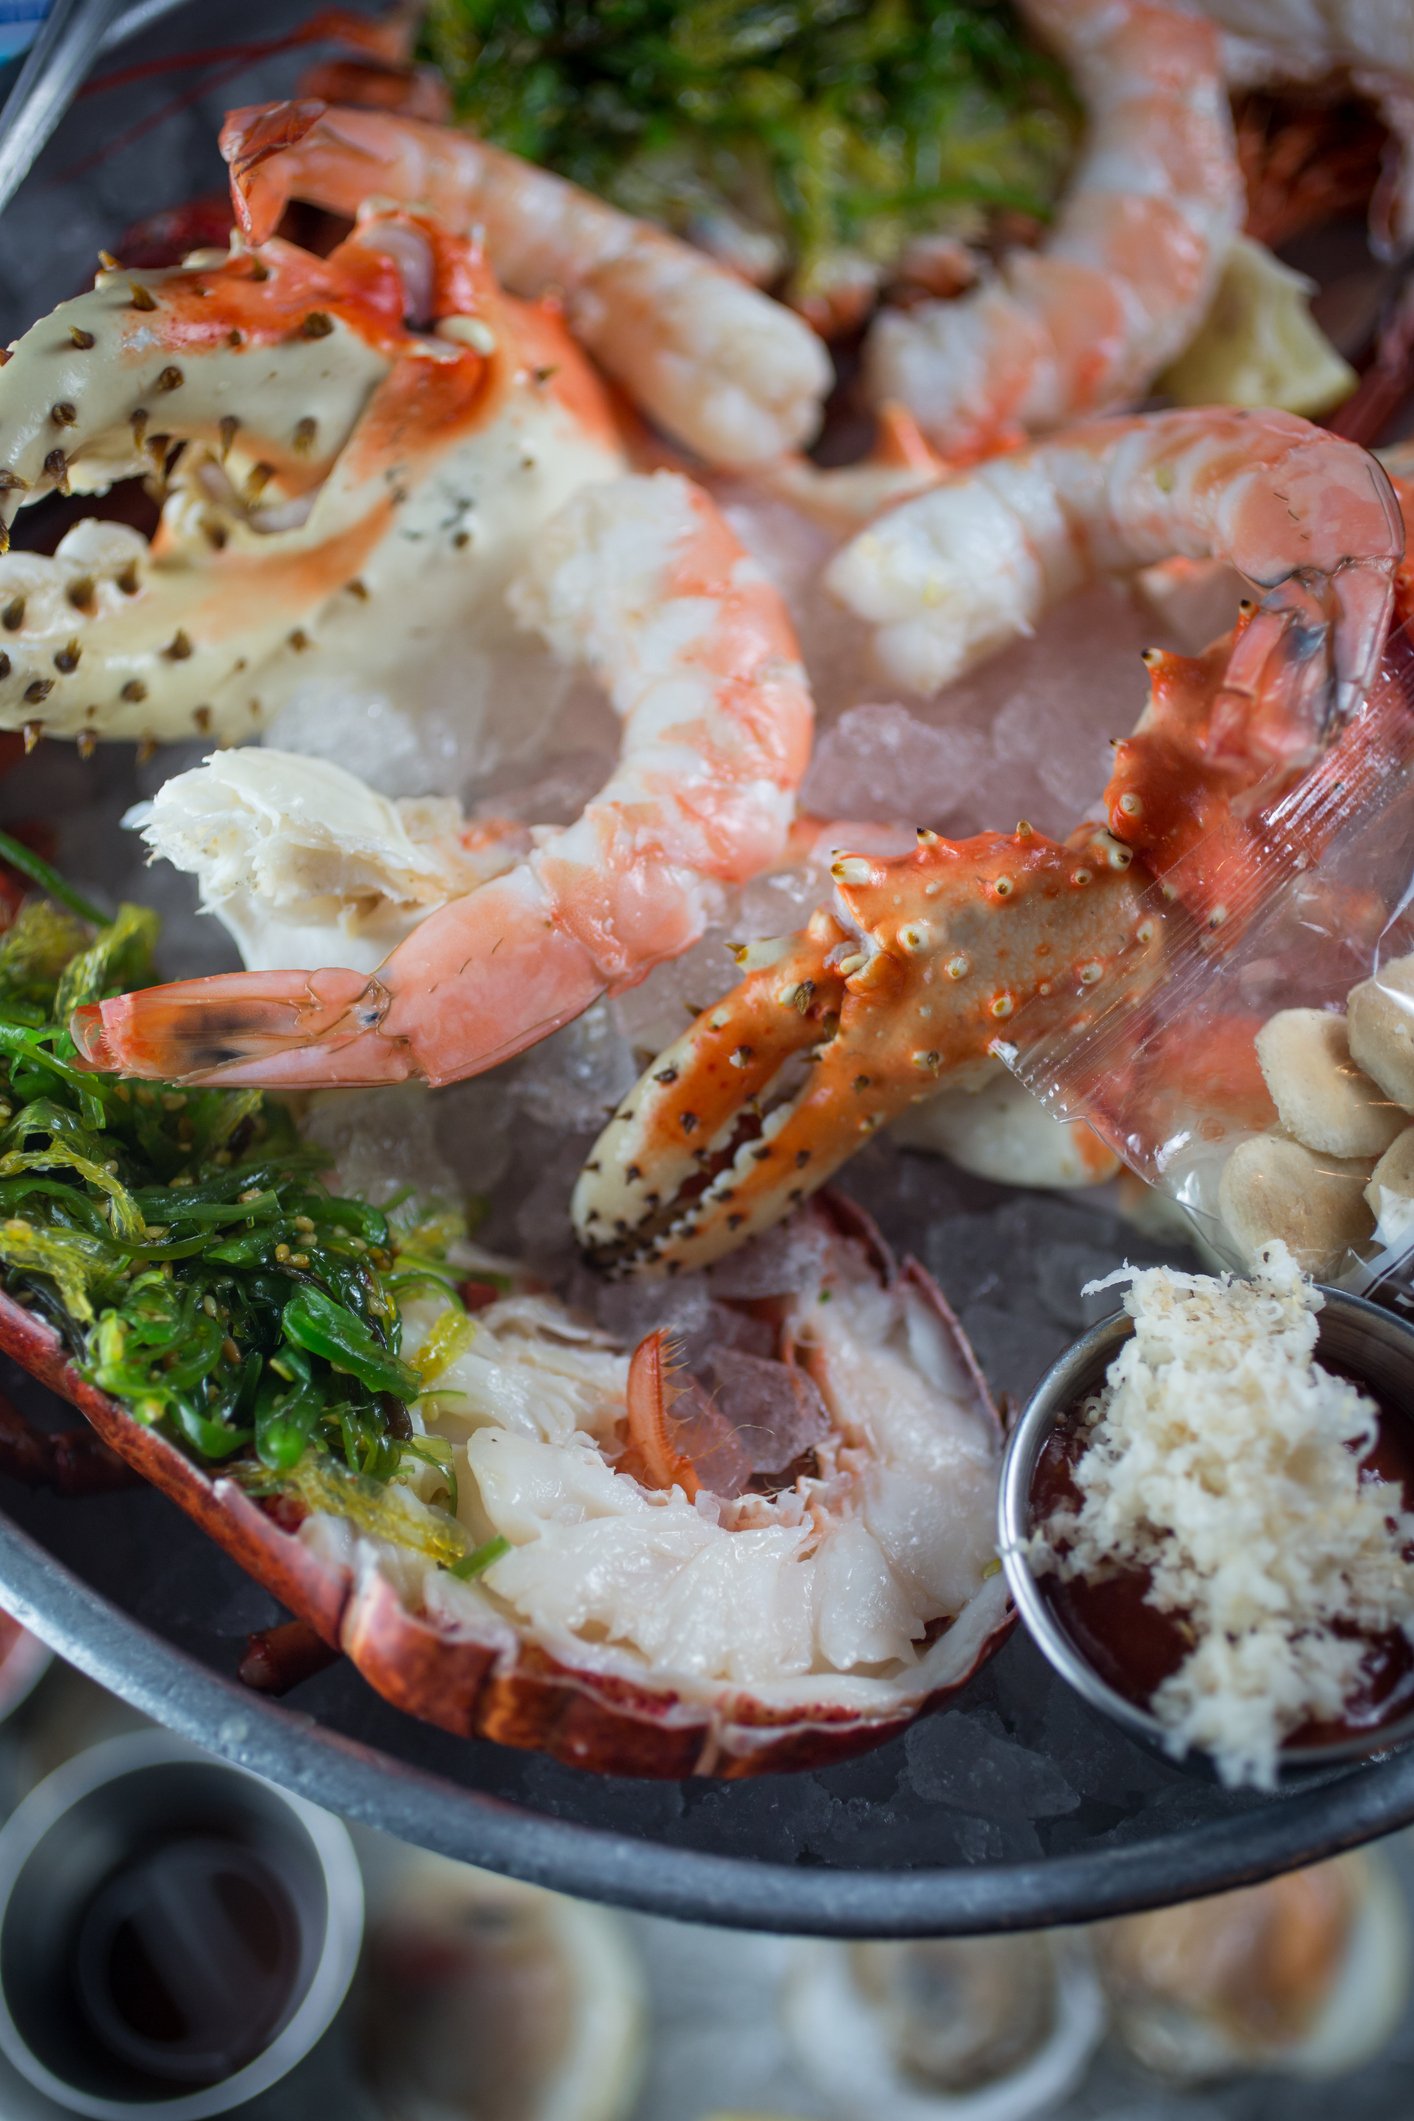 A close up view of a seafood platter prepared by Cassia